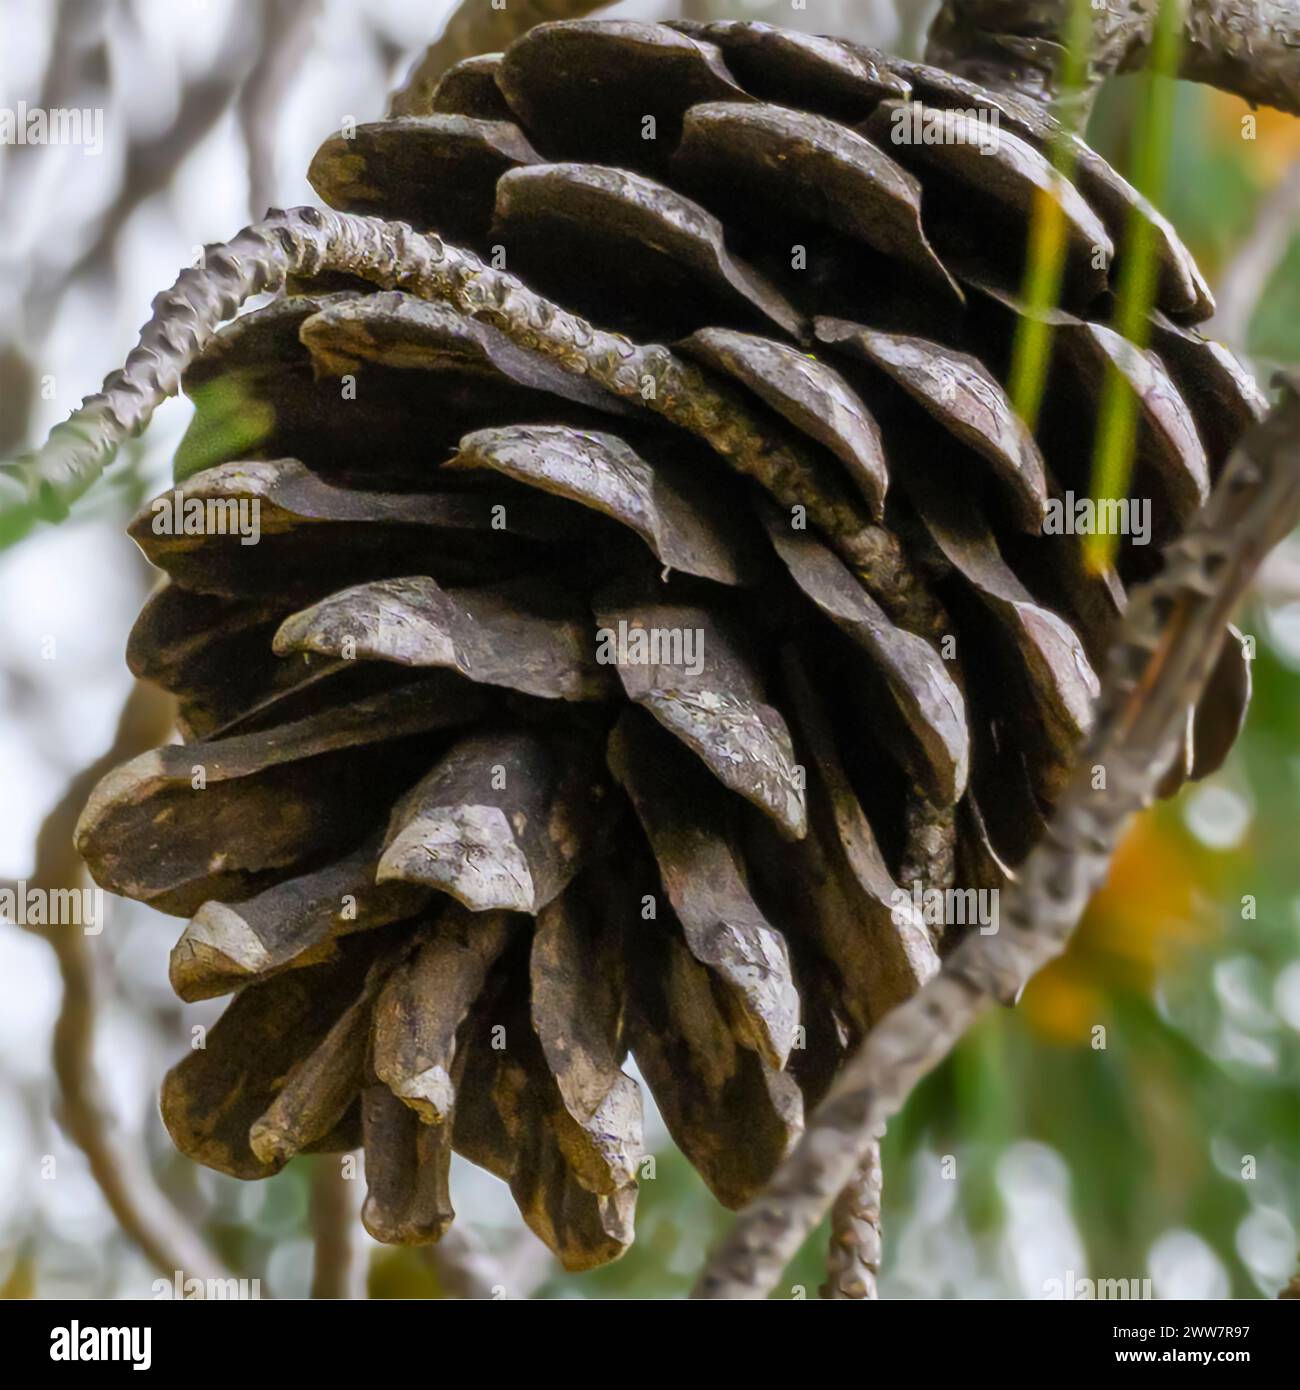 Pine tree cone Pinus halepensis, commonly known as the Aleppo pine, also known as the Jerusalem pine, is a pine native to the Mediterranean region. Ph Stock Photo